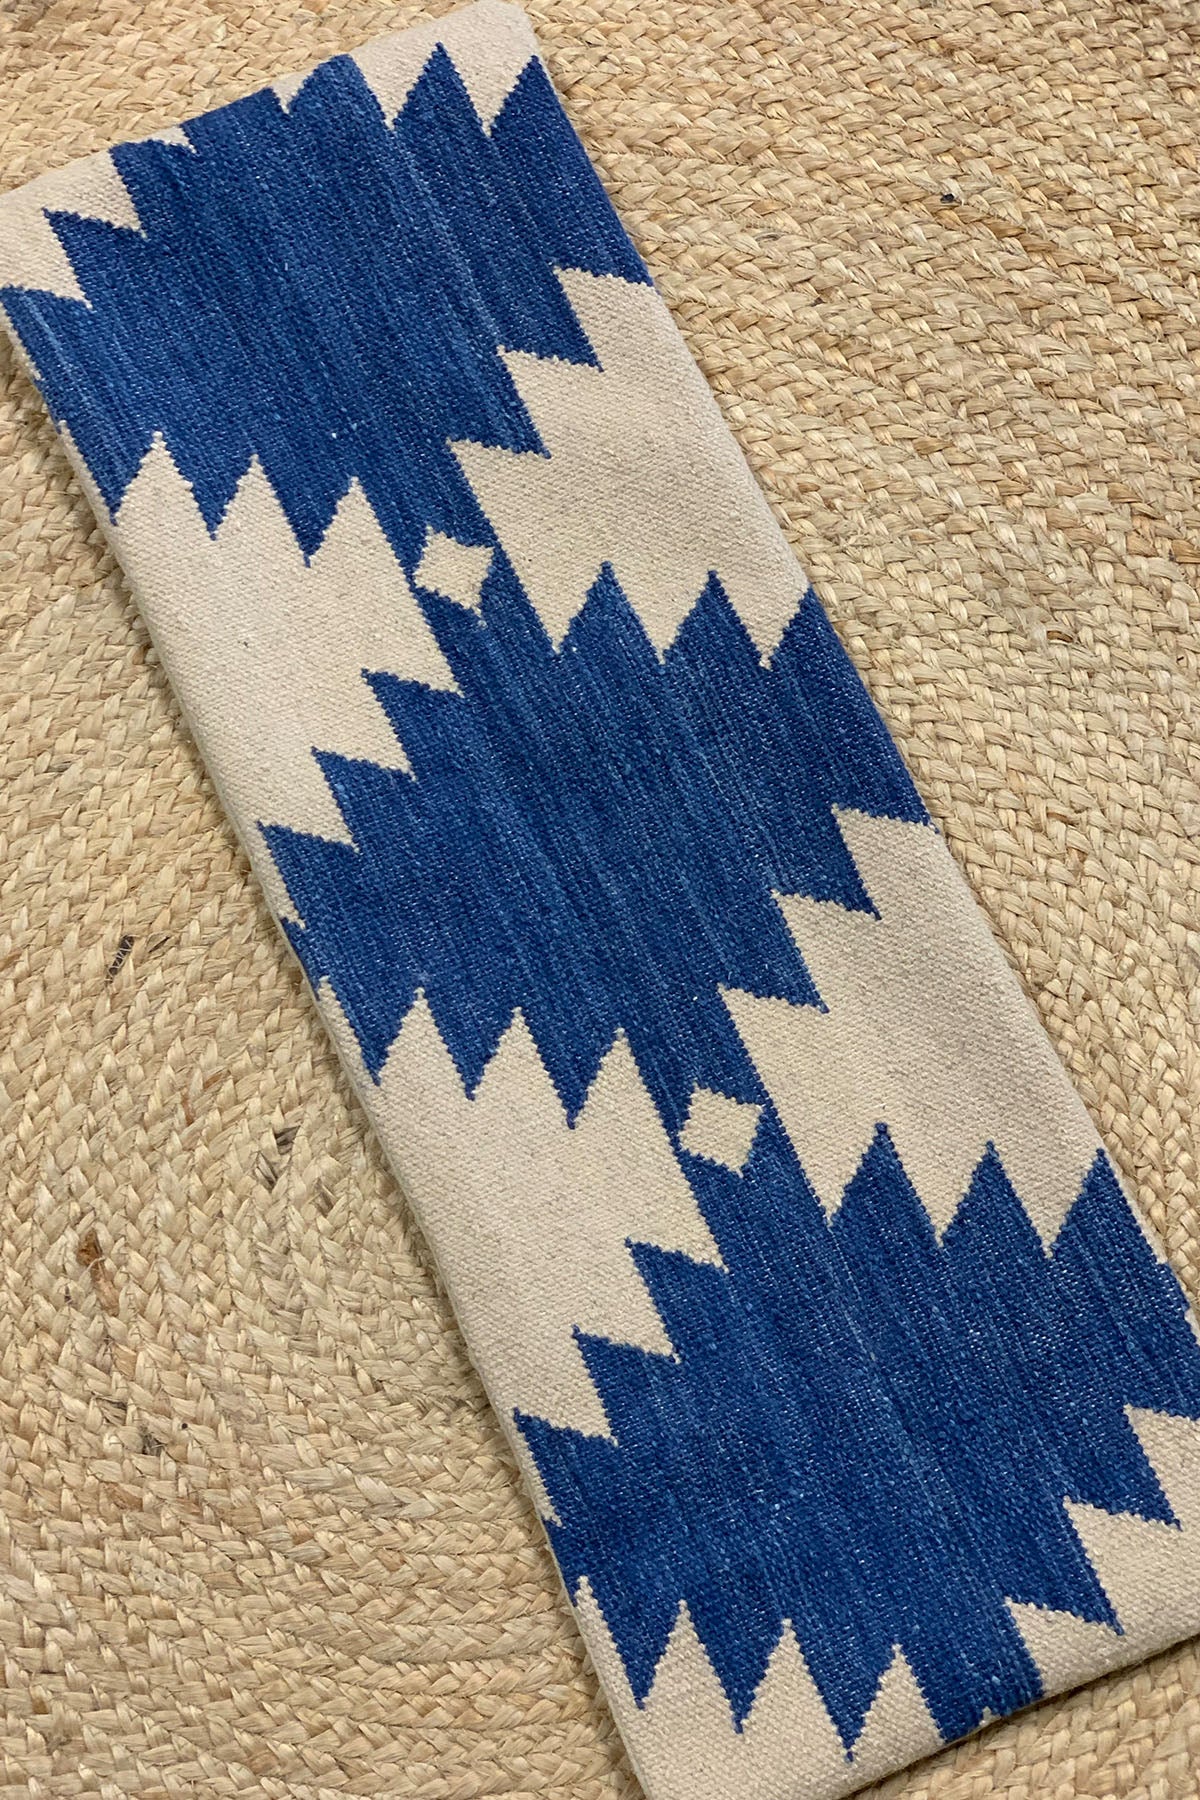 Blue + beige kilim pillow (cover only)